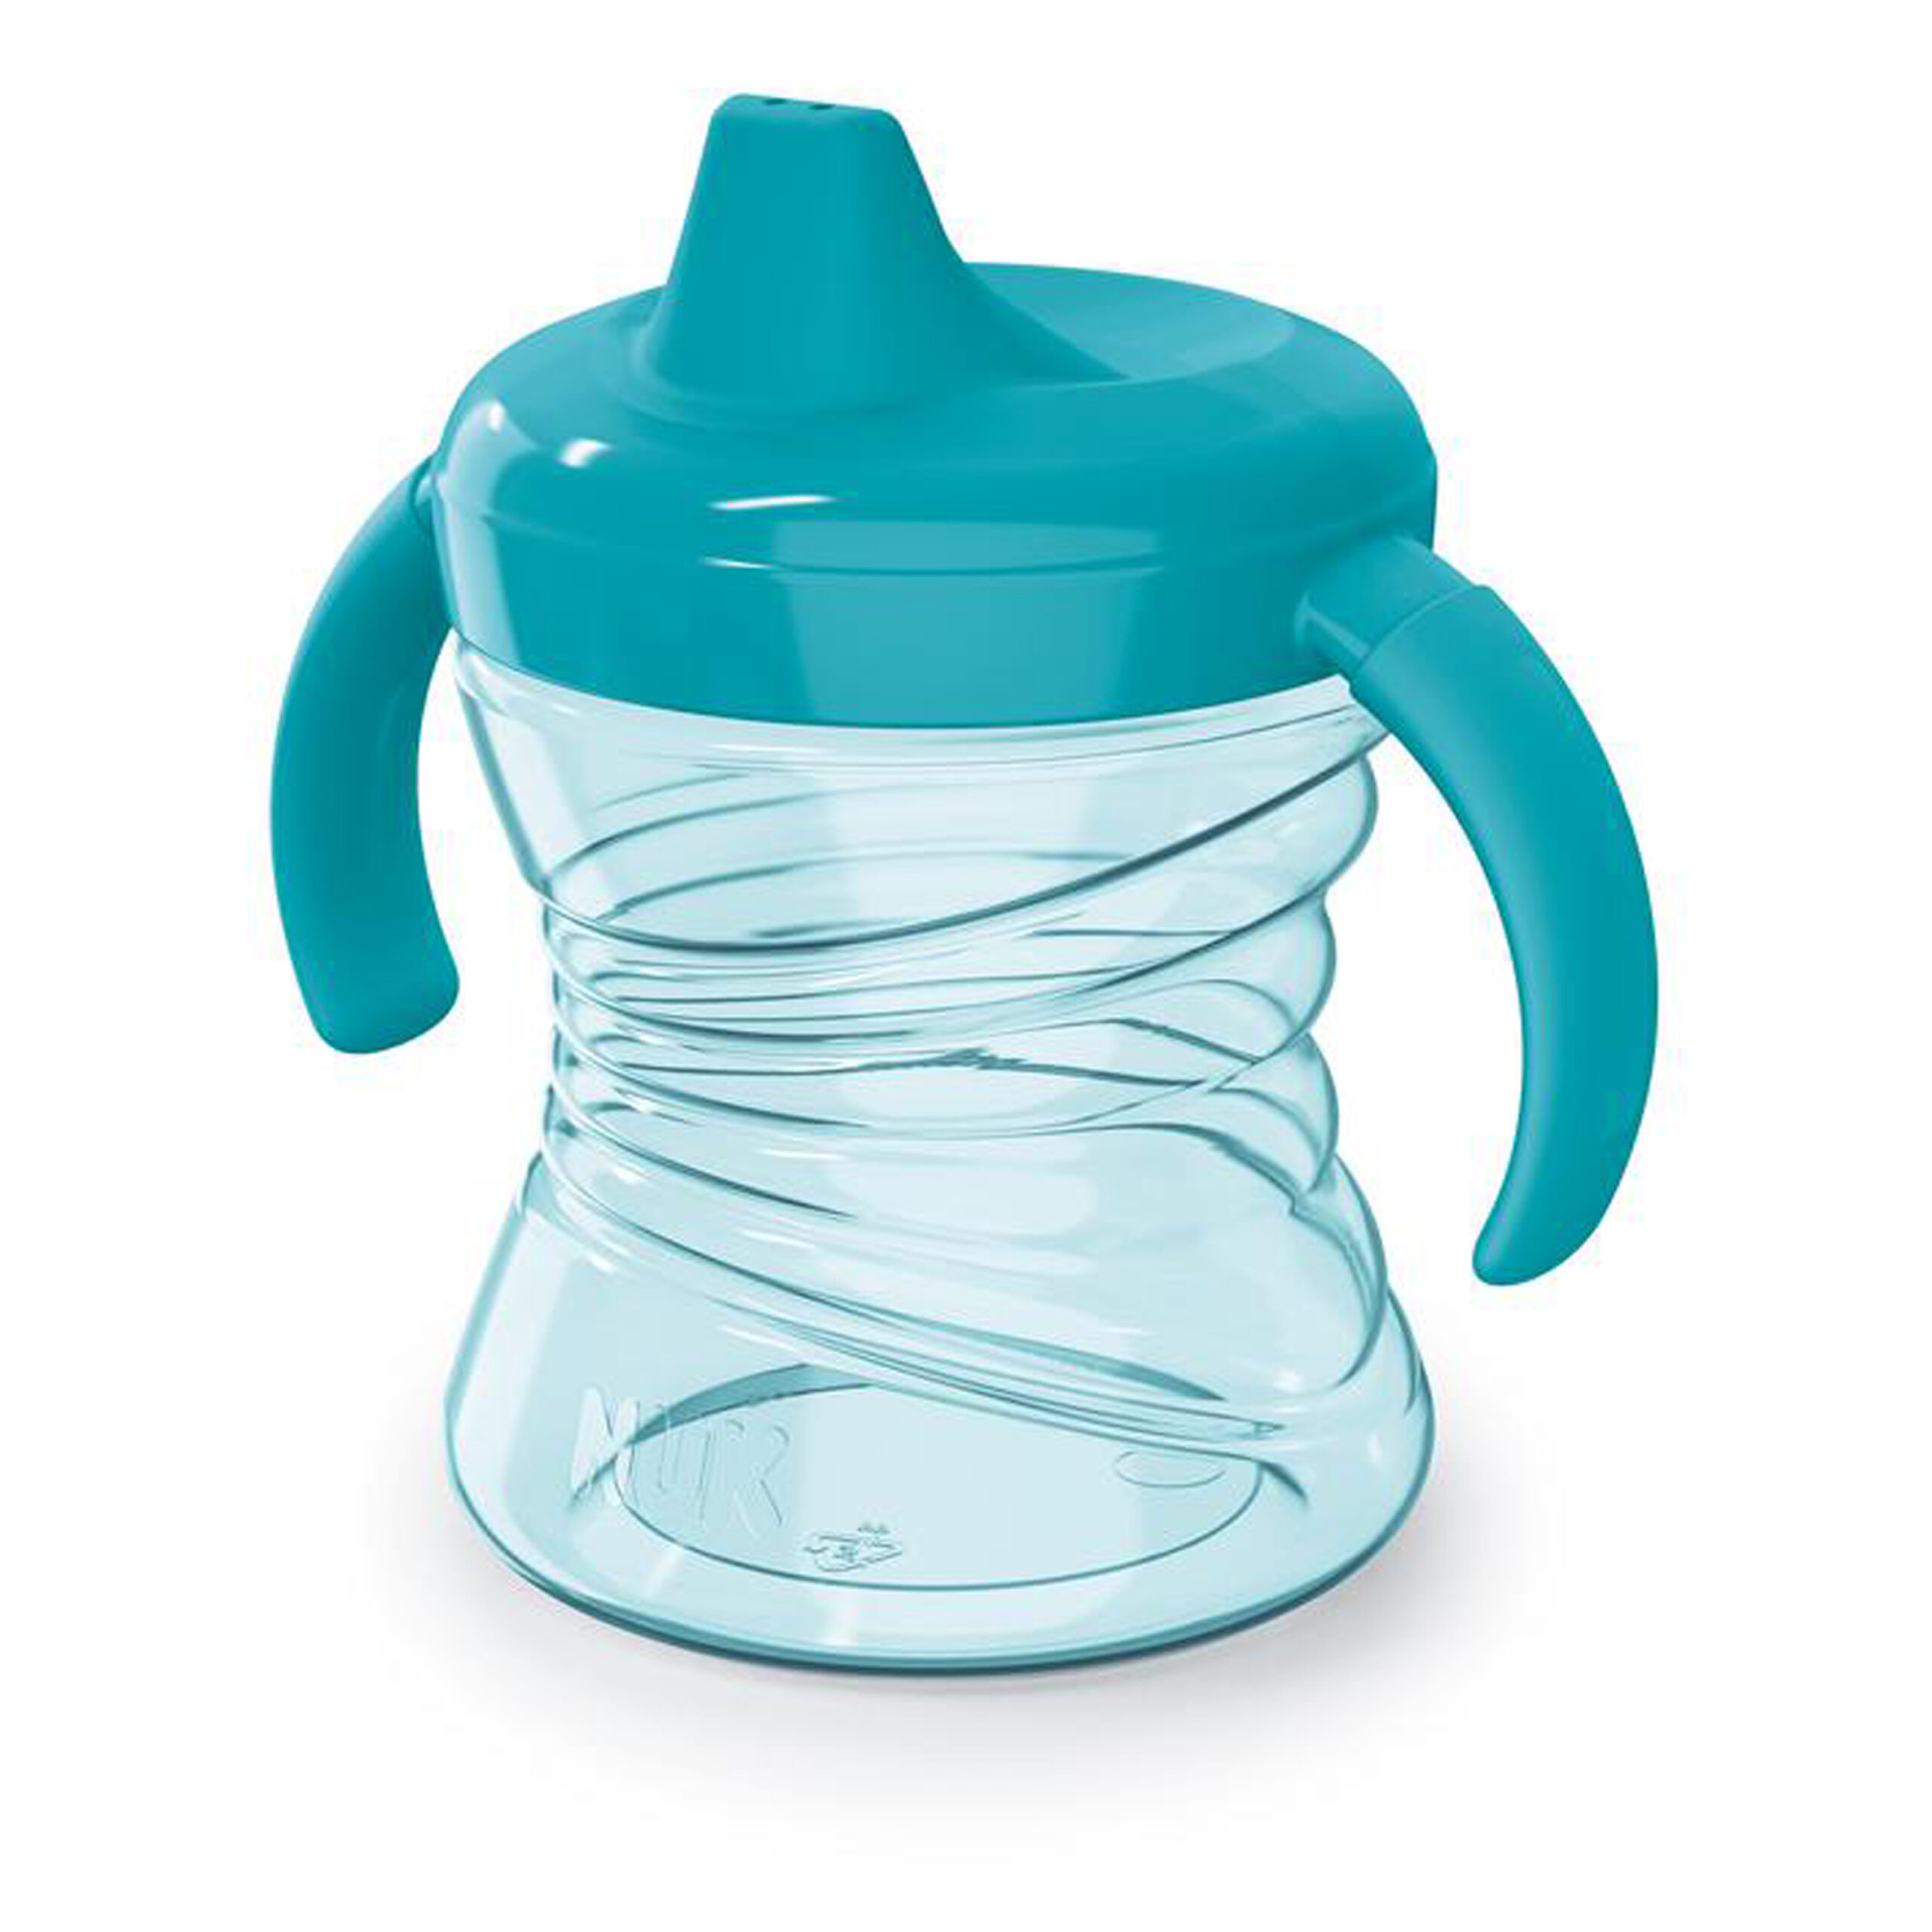 NUK® Fun Grips Hard Spout Sippy Cup, 10OZ Product Image 1 of 7